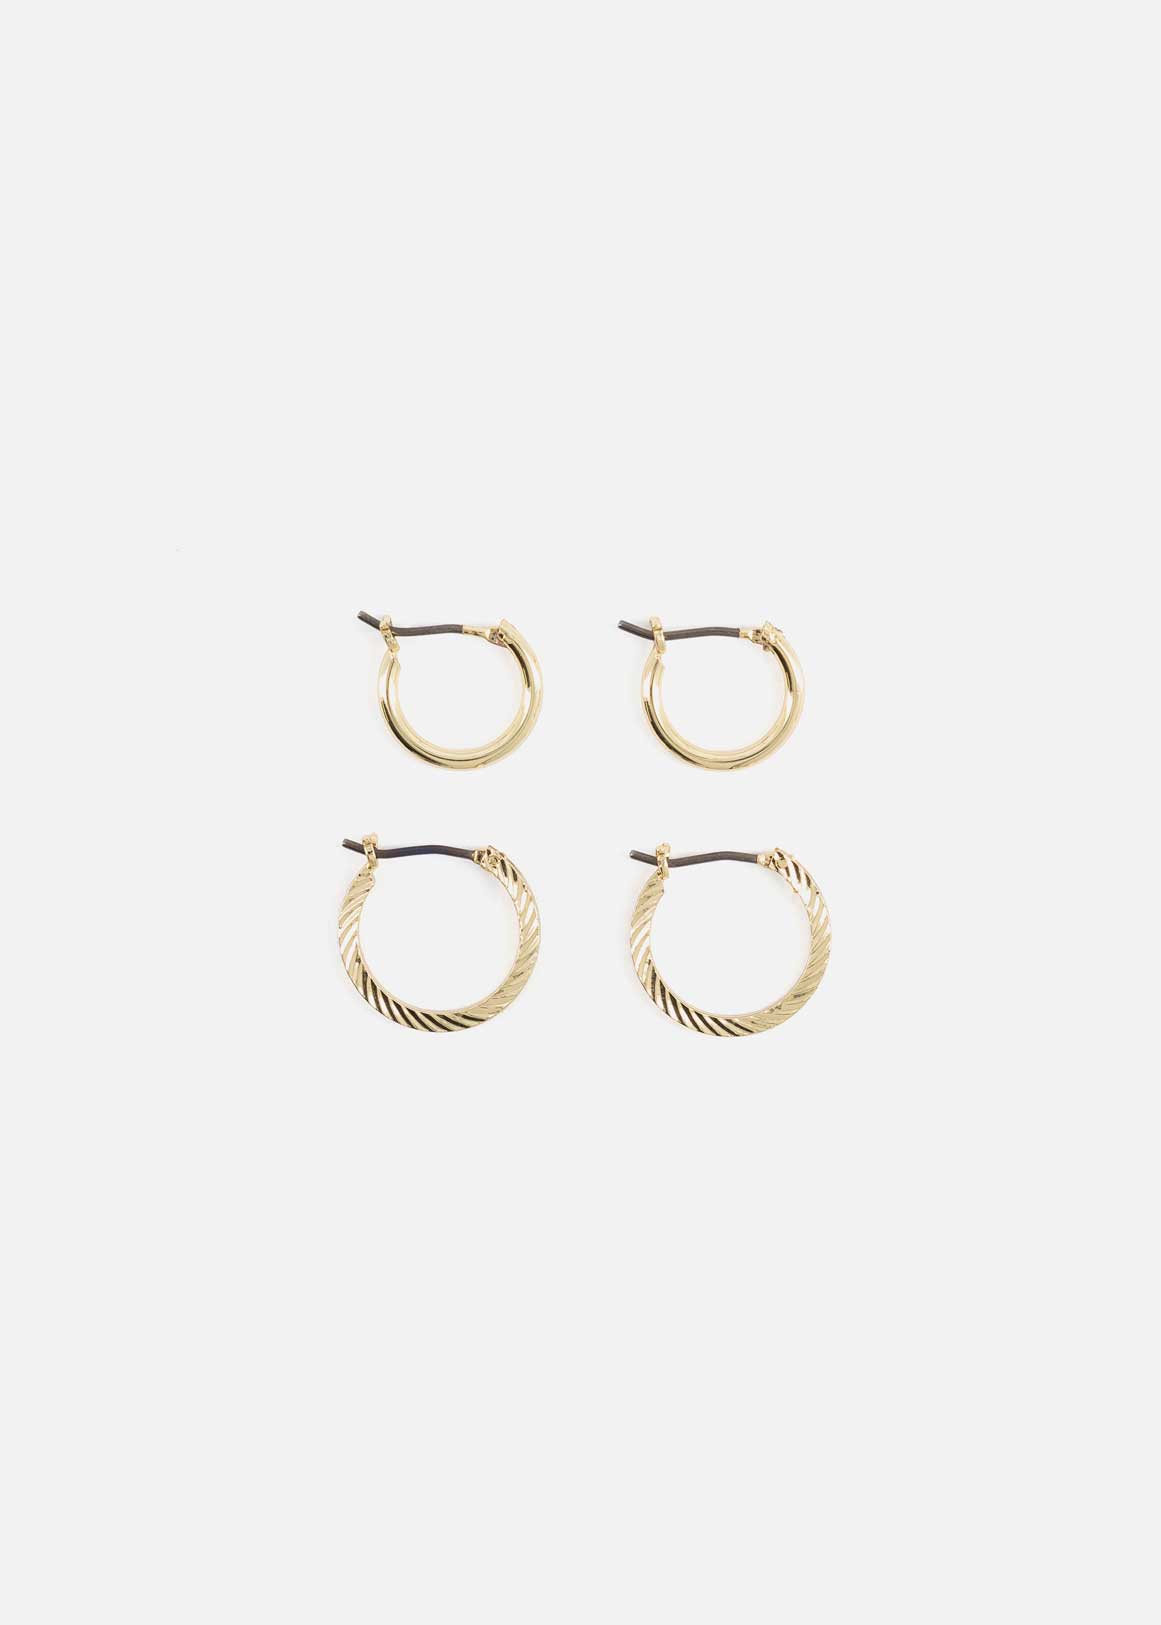 Gold Plated Hoop Earrings 2 Pack | Woolworths.co.za